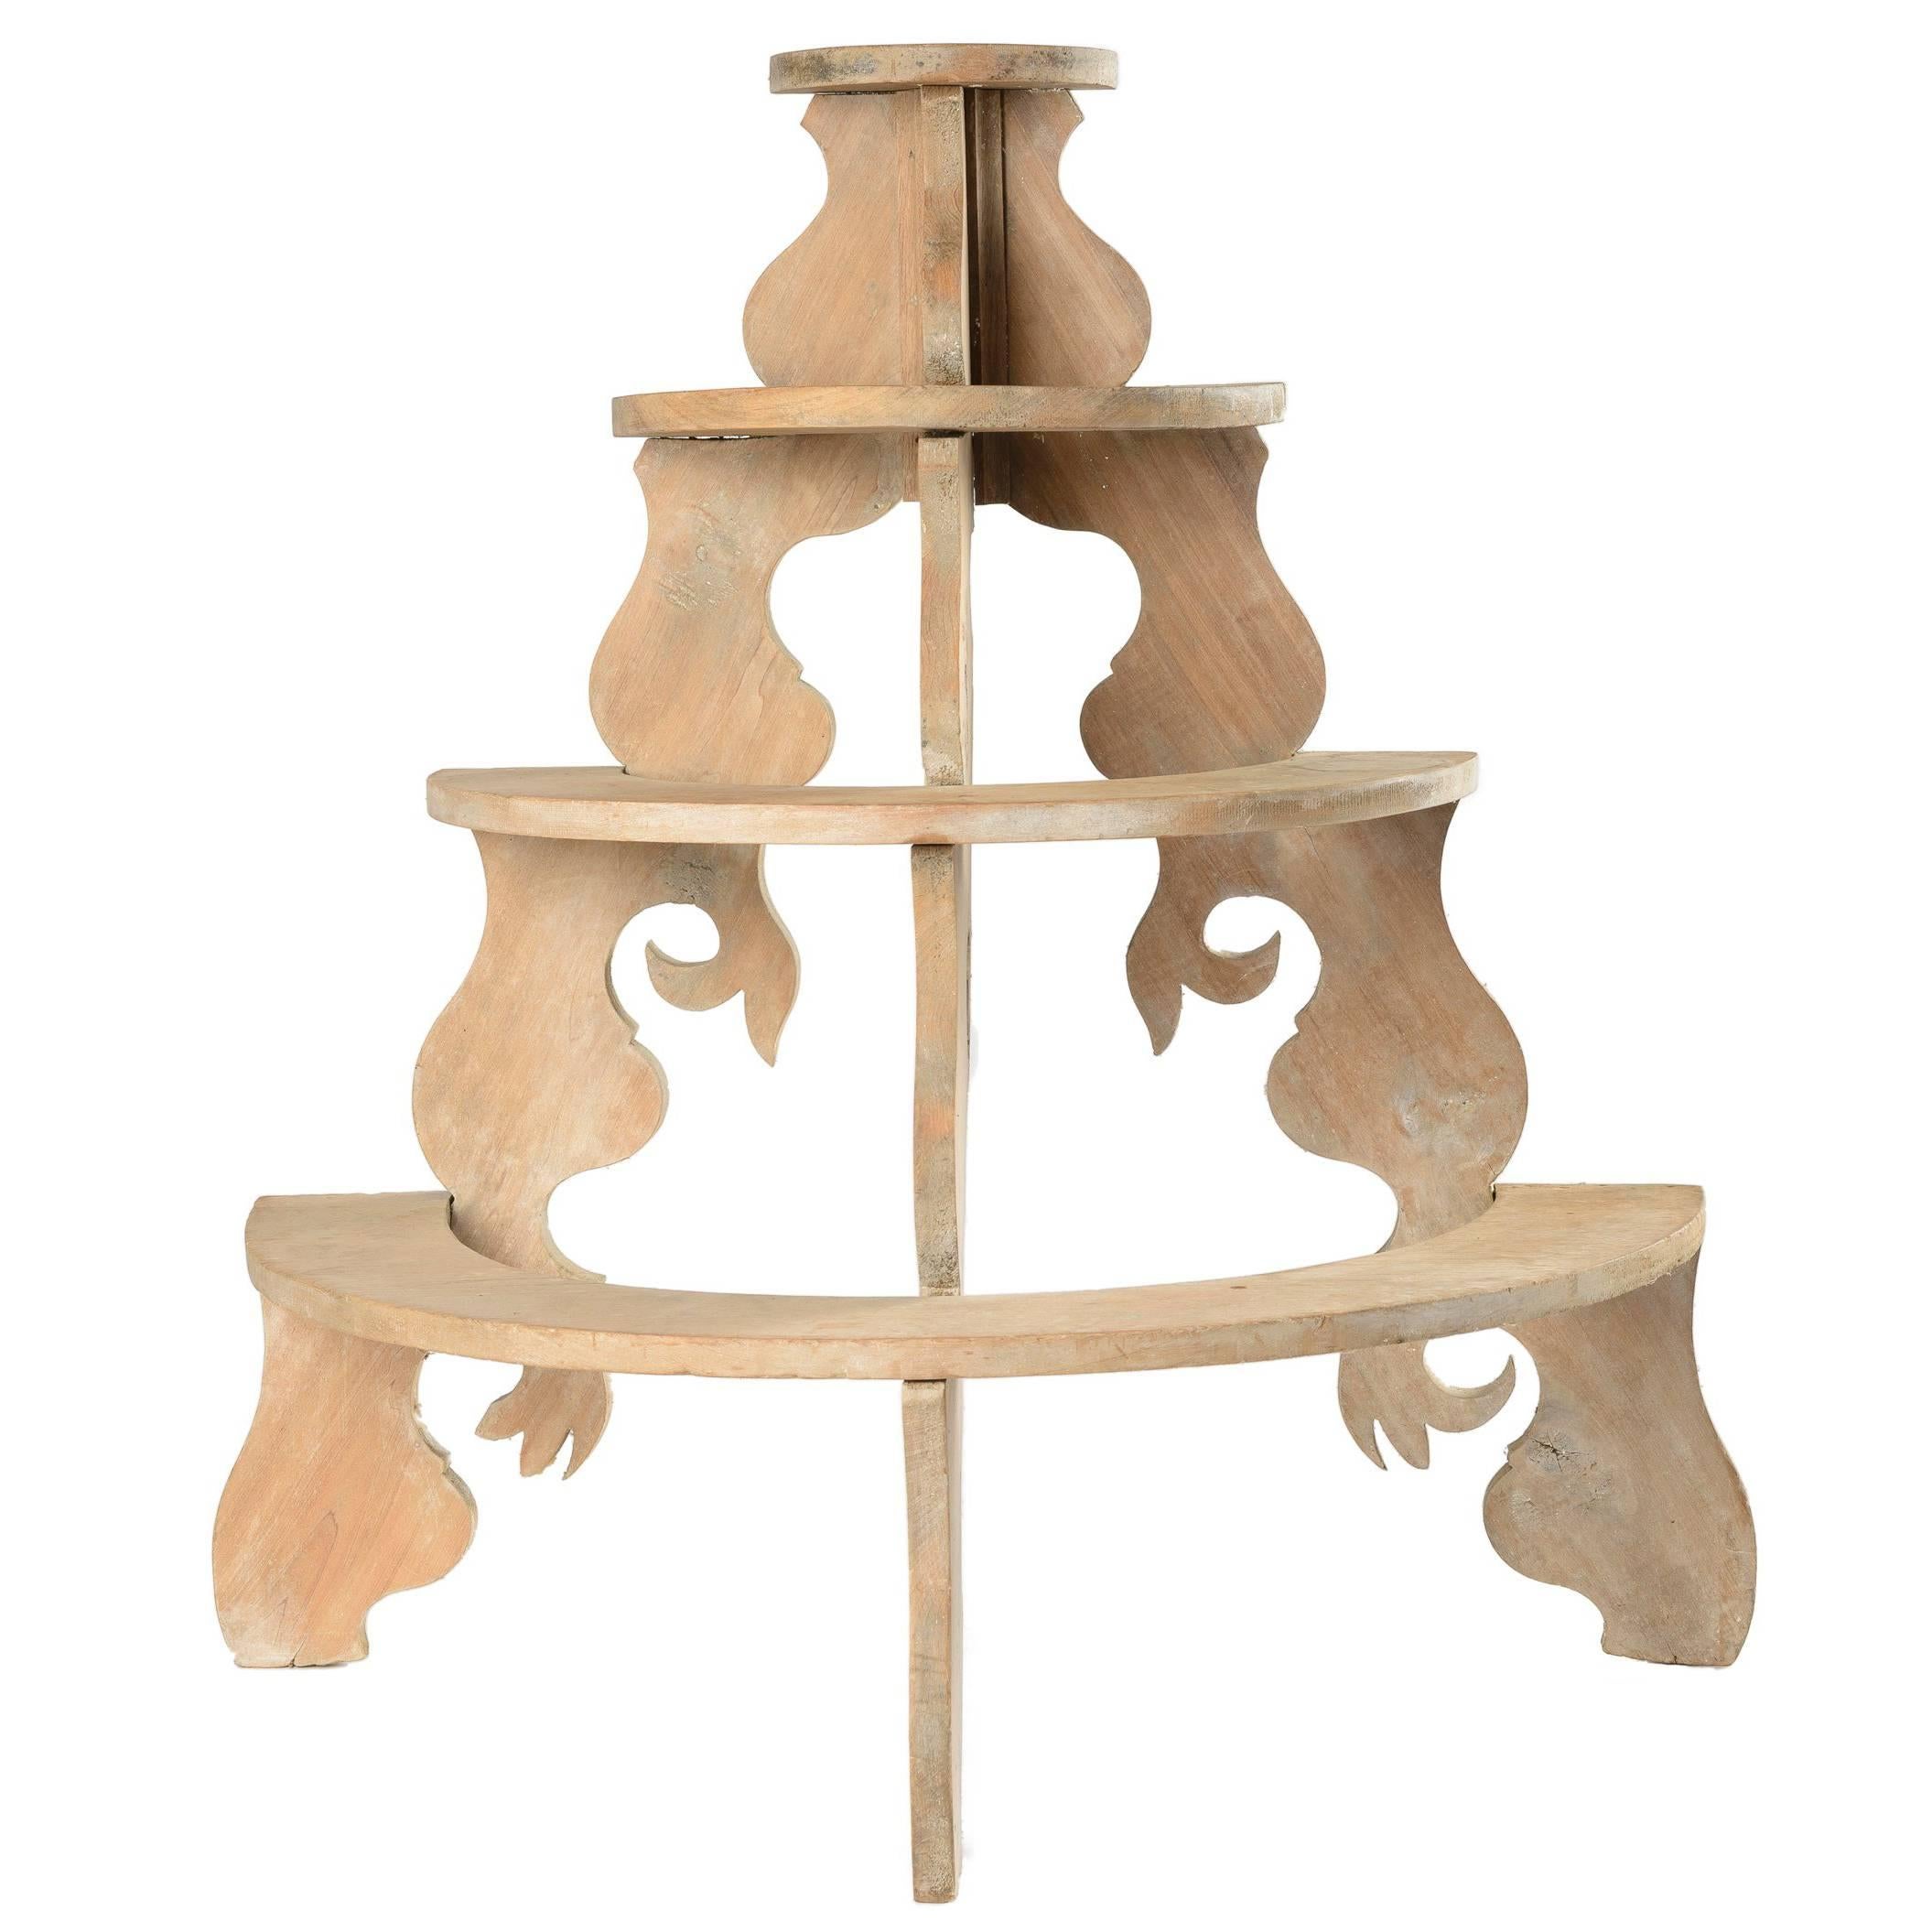 Whimsical Wood Three Tier Stand for Plants or Collectibles